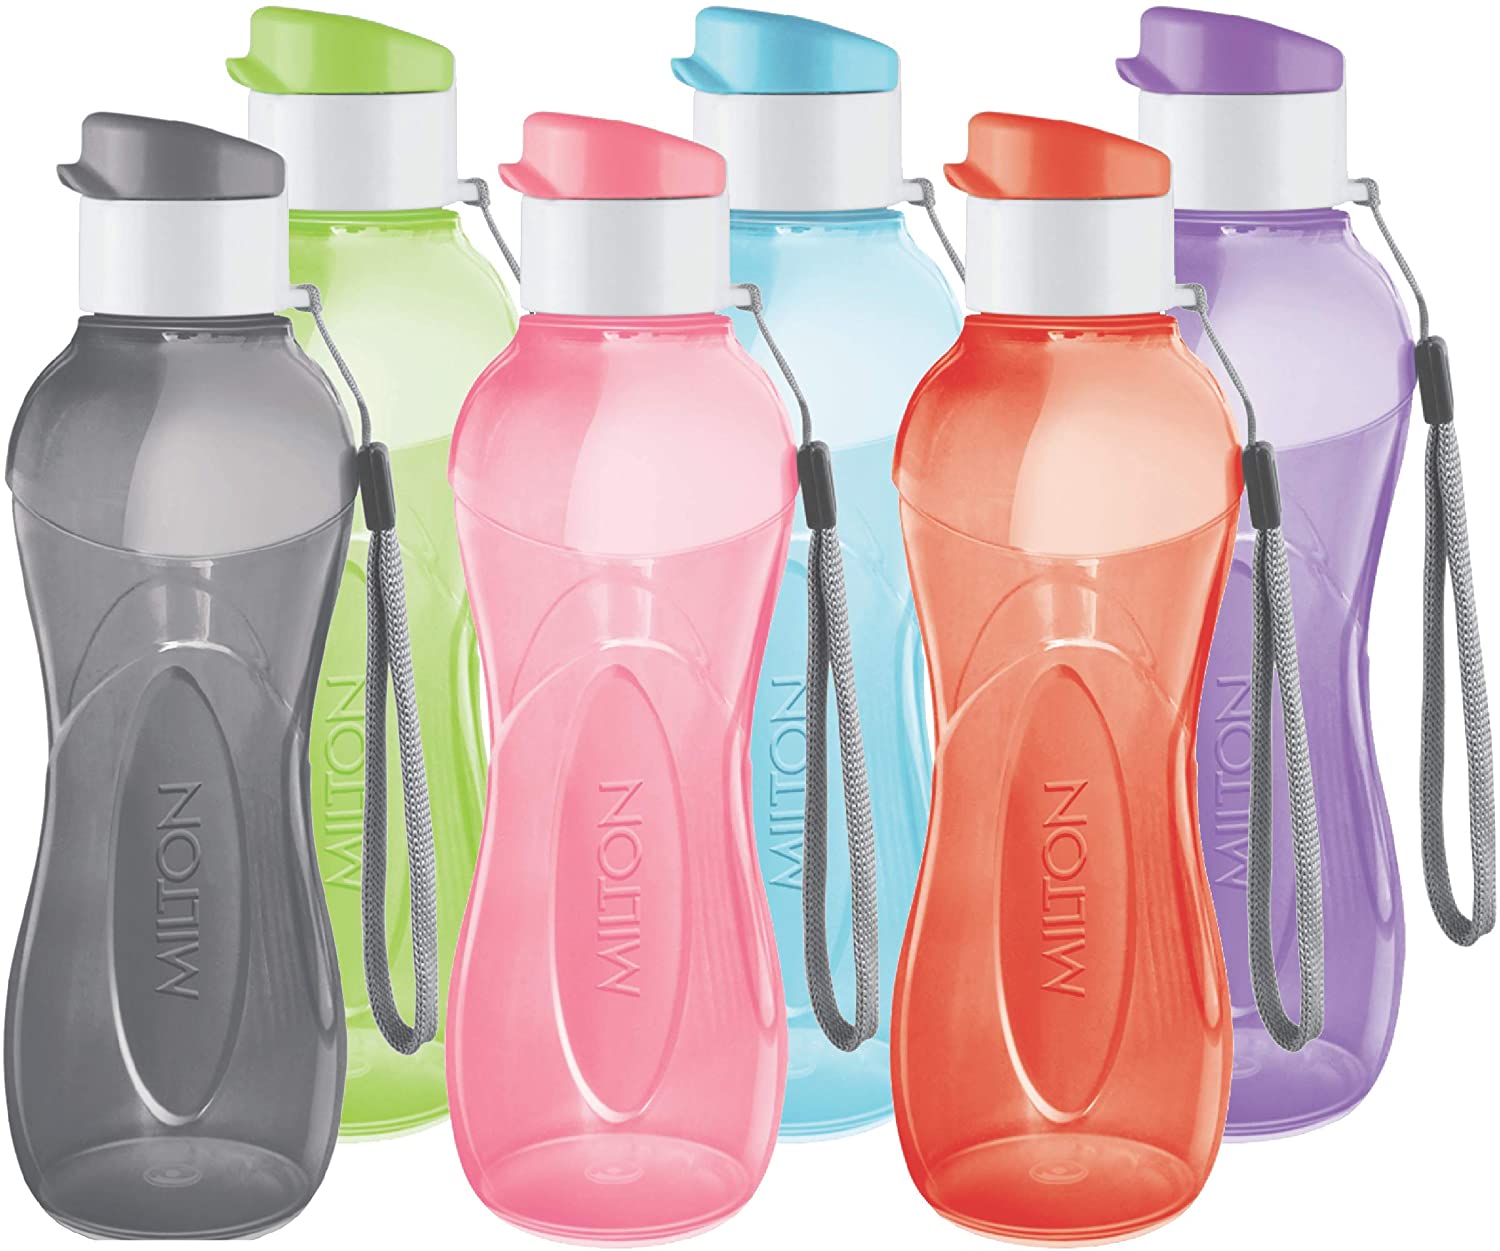 30 Water bottles. What is the best choice?